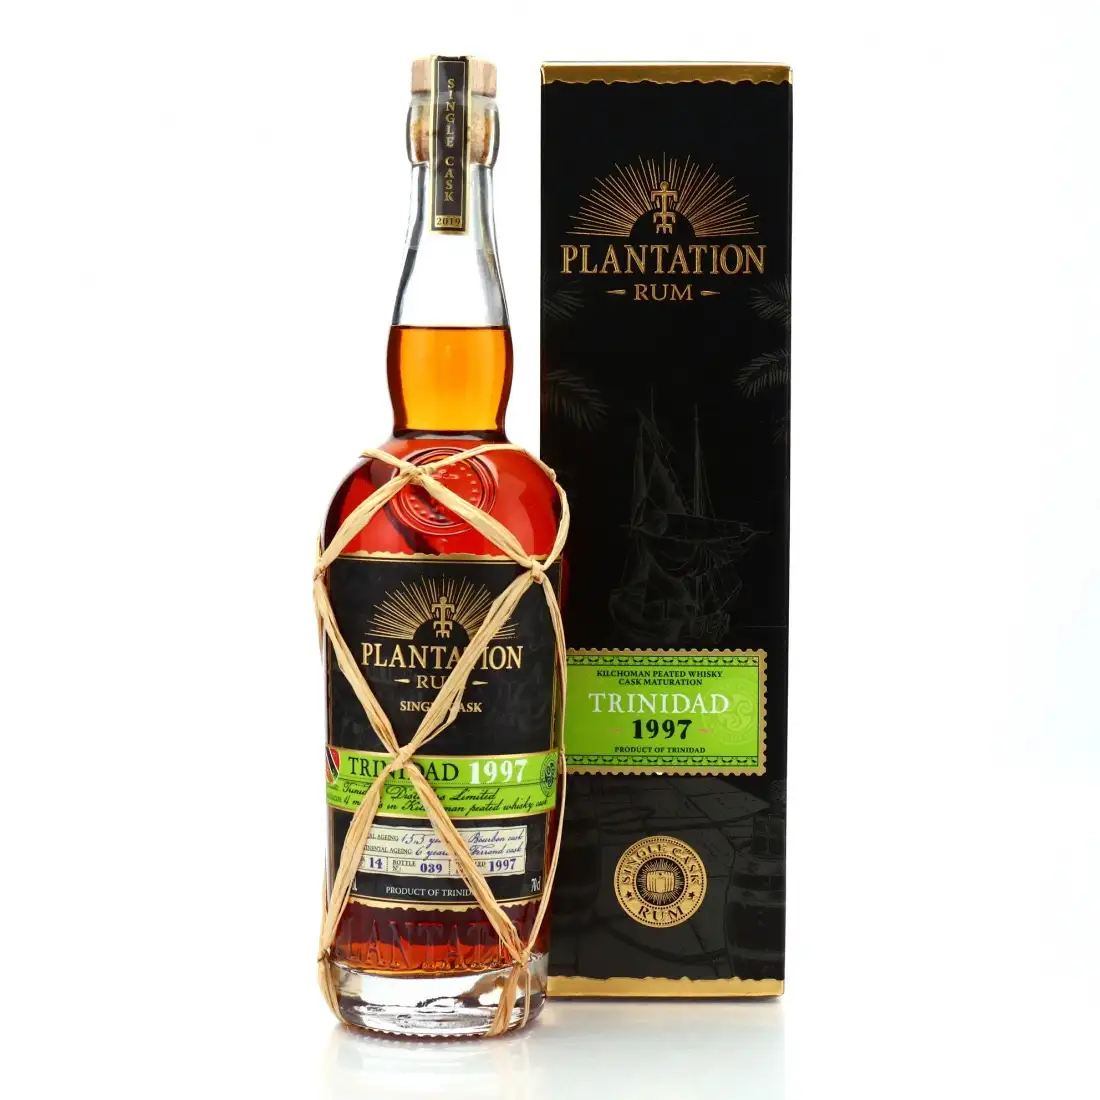 Image of the front of the bottle of the rum Plantation Trinidad 1997 - Single Cask 2019